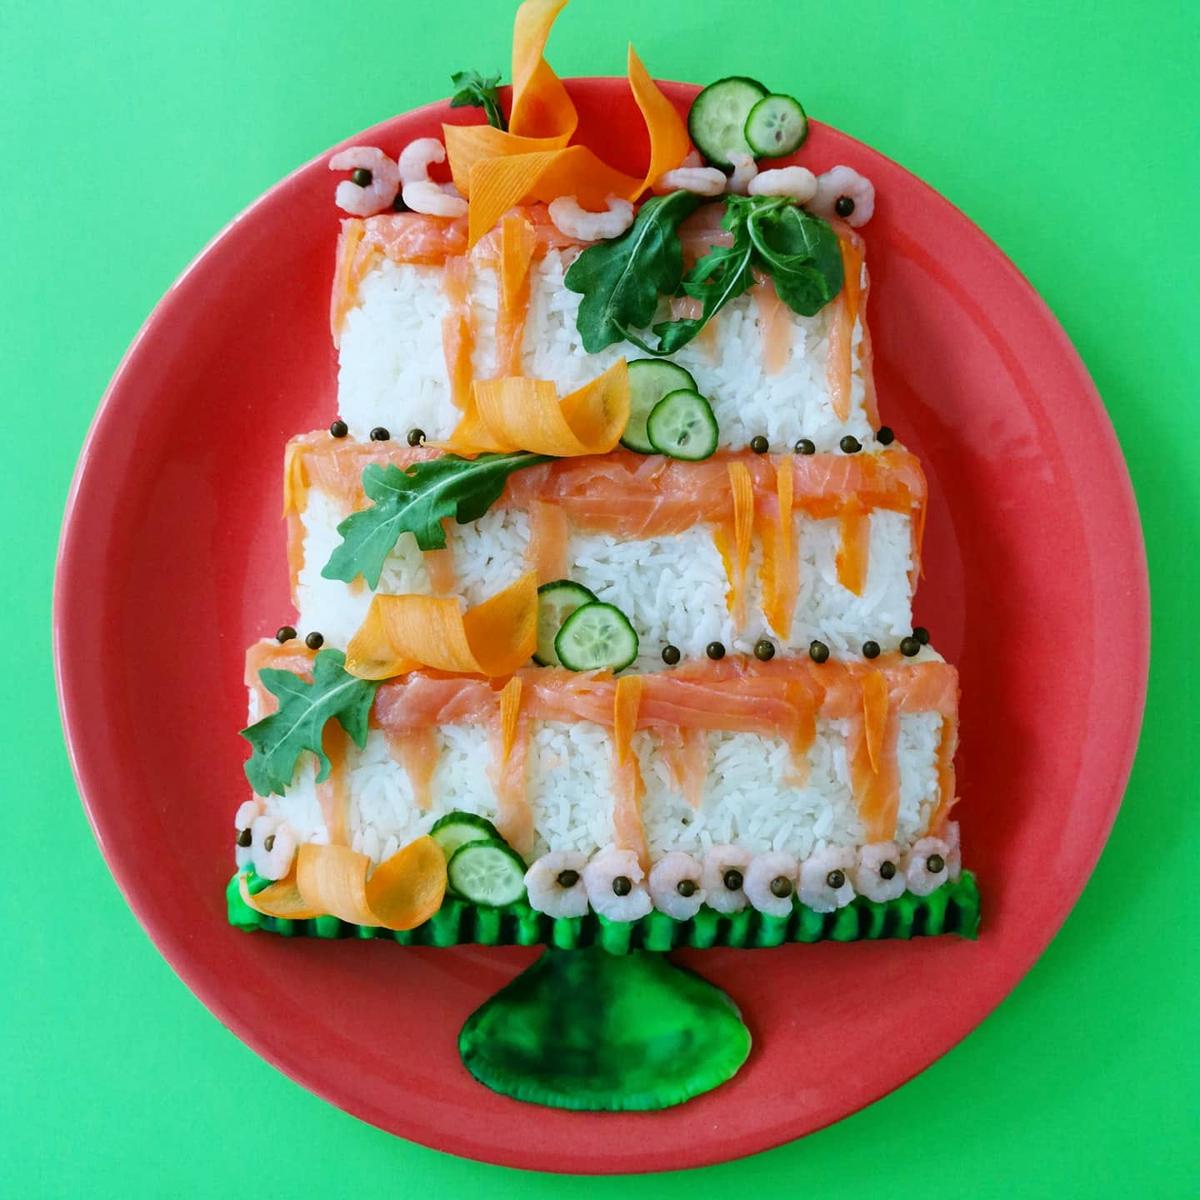 "Sushi Drip Cake" made of rice, smoked salmon, shrimp, cucumber, carrots, and rucola (rocket). Can be served with ginger, wasabi, and soy sauce.  (Courtesy of <a href="https://www.instagram.com/demealprepper/">Jolanda Stokkermans</a>)